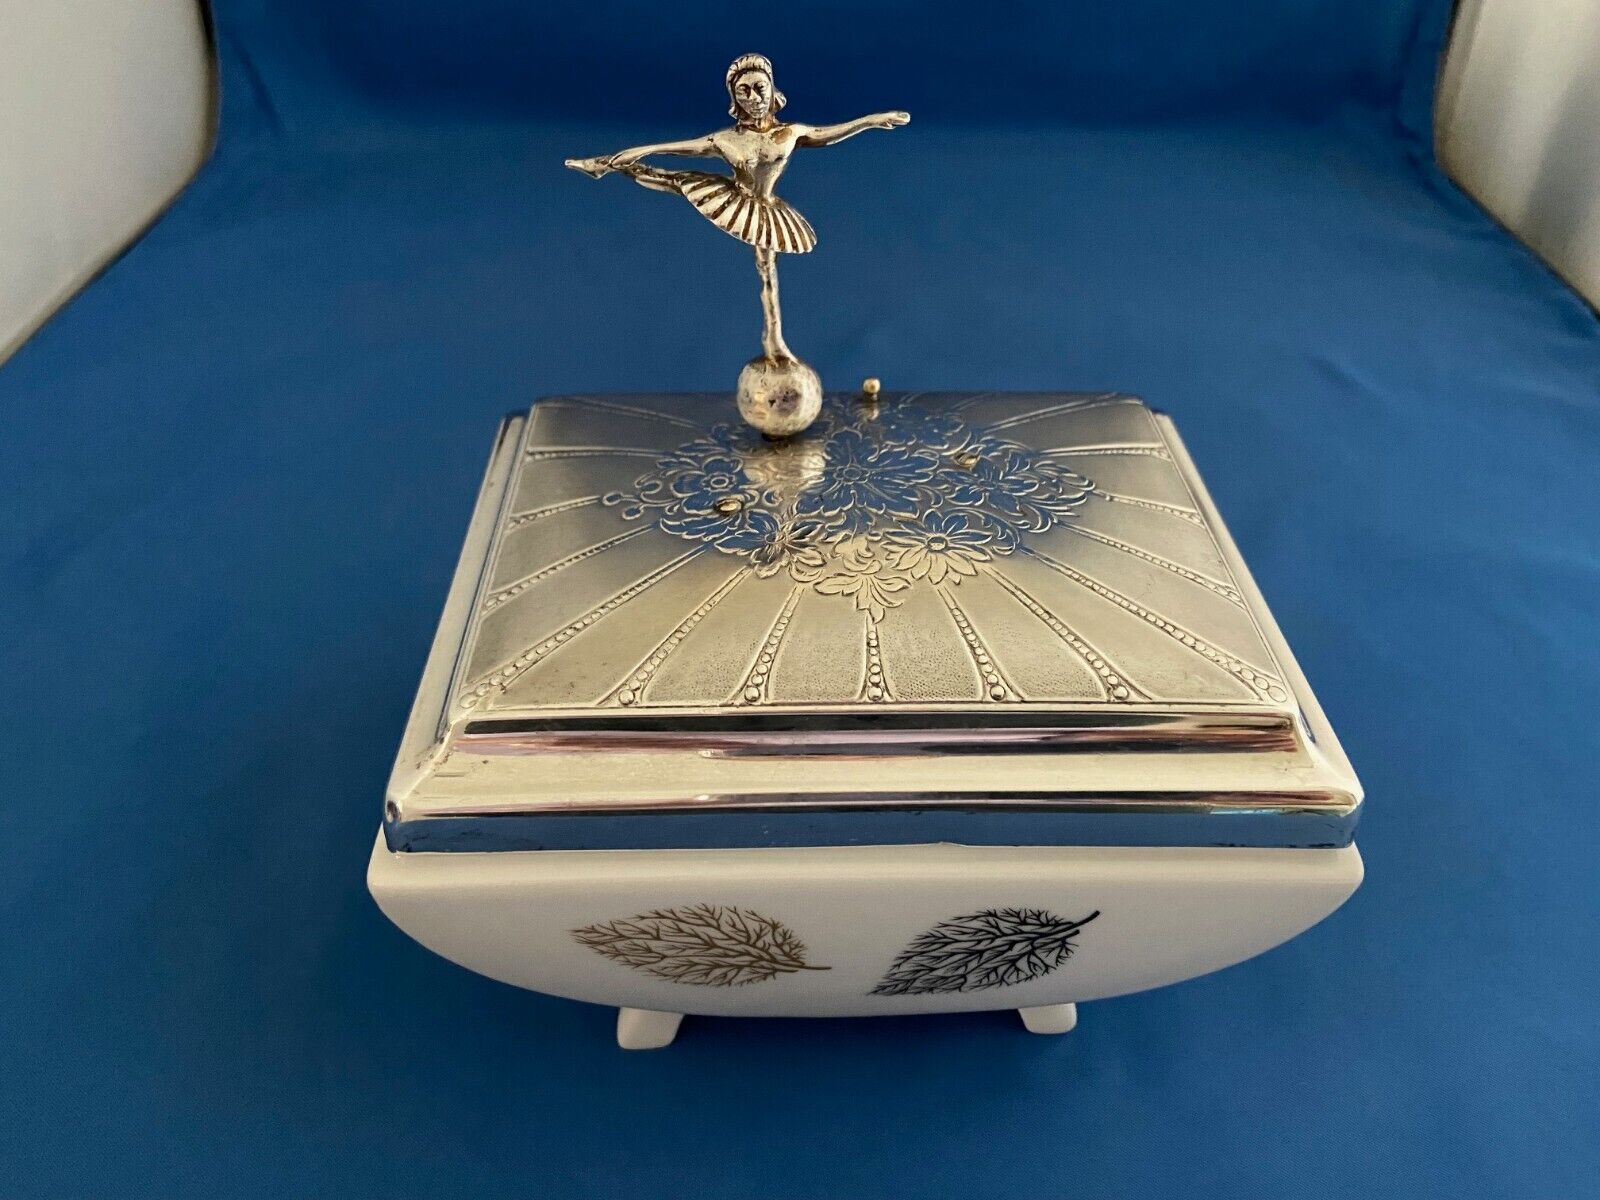 How To Make A Music Box With Ballerina